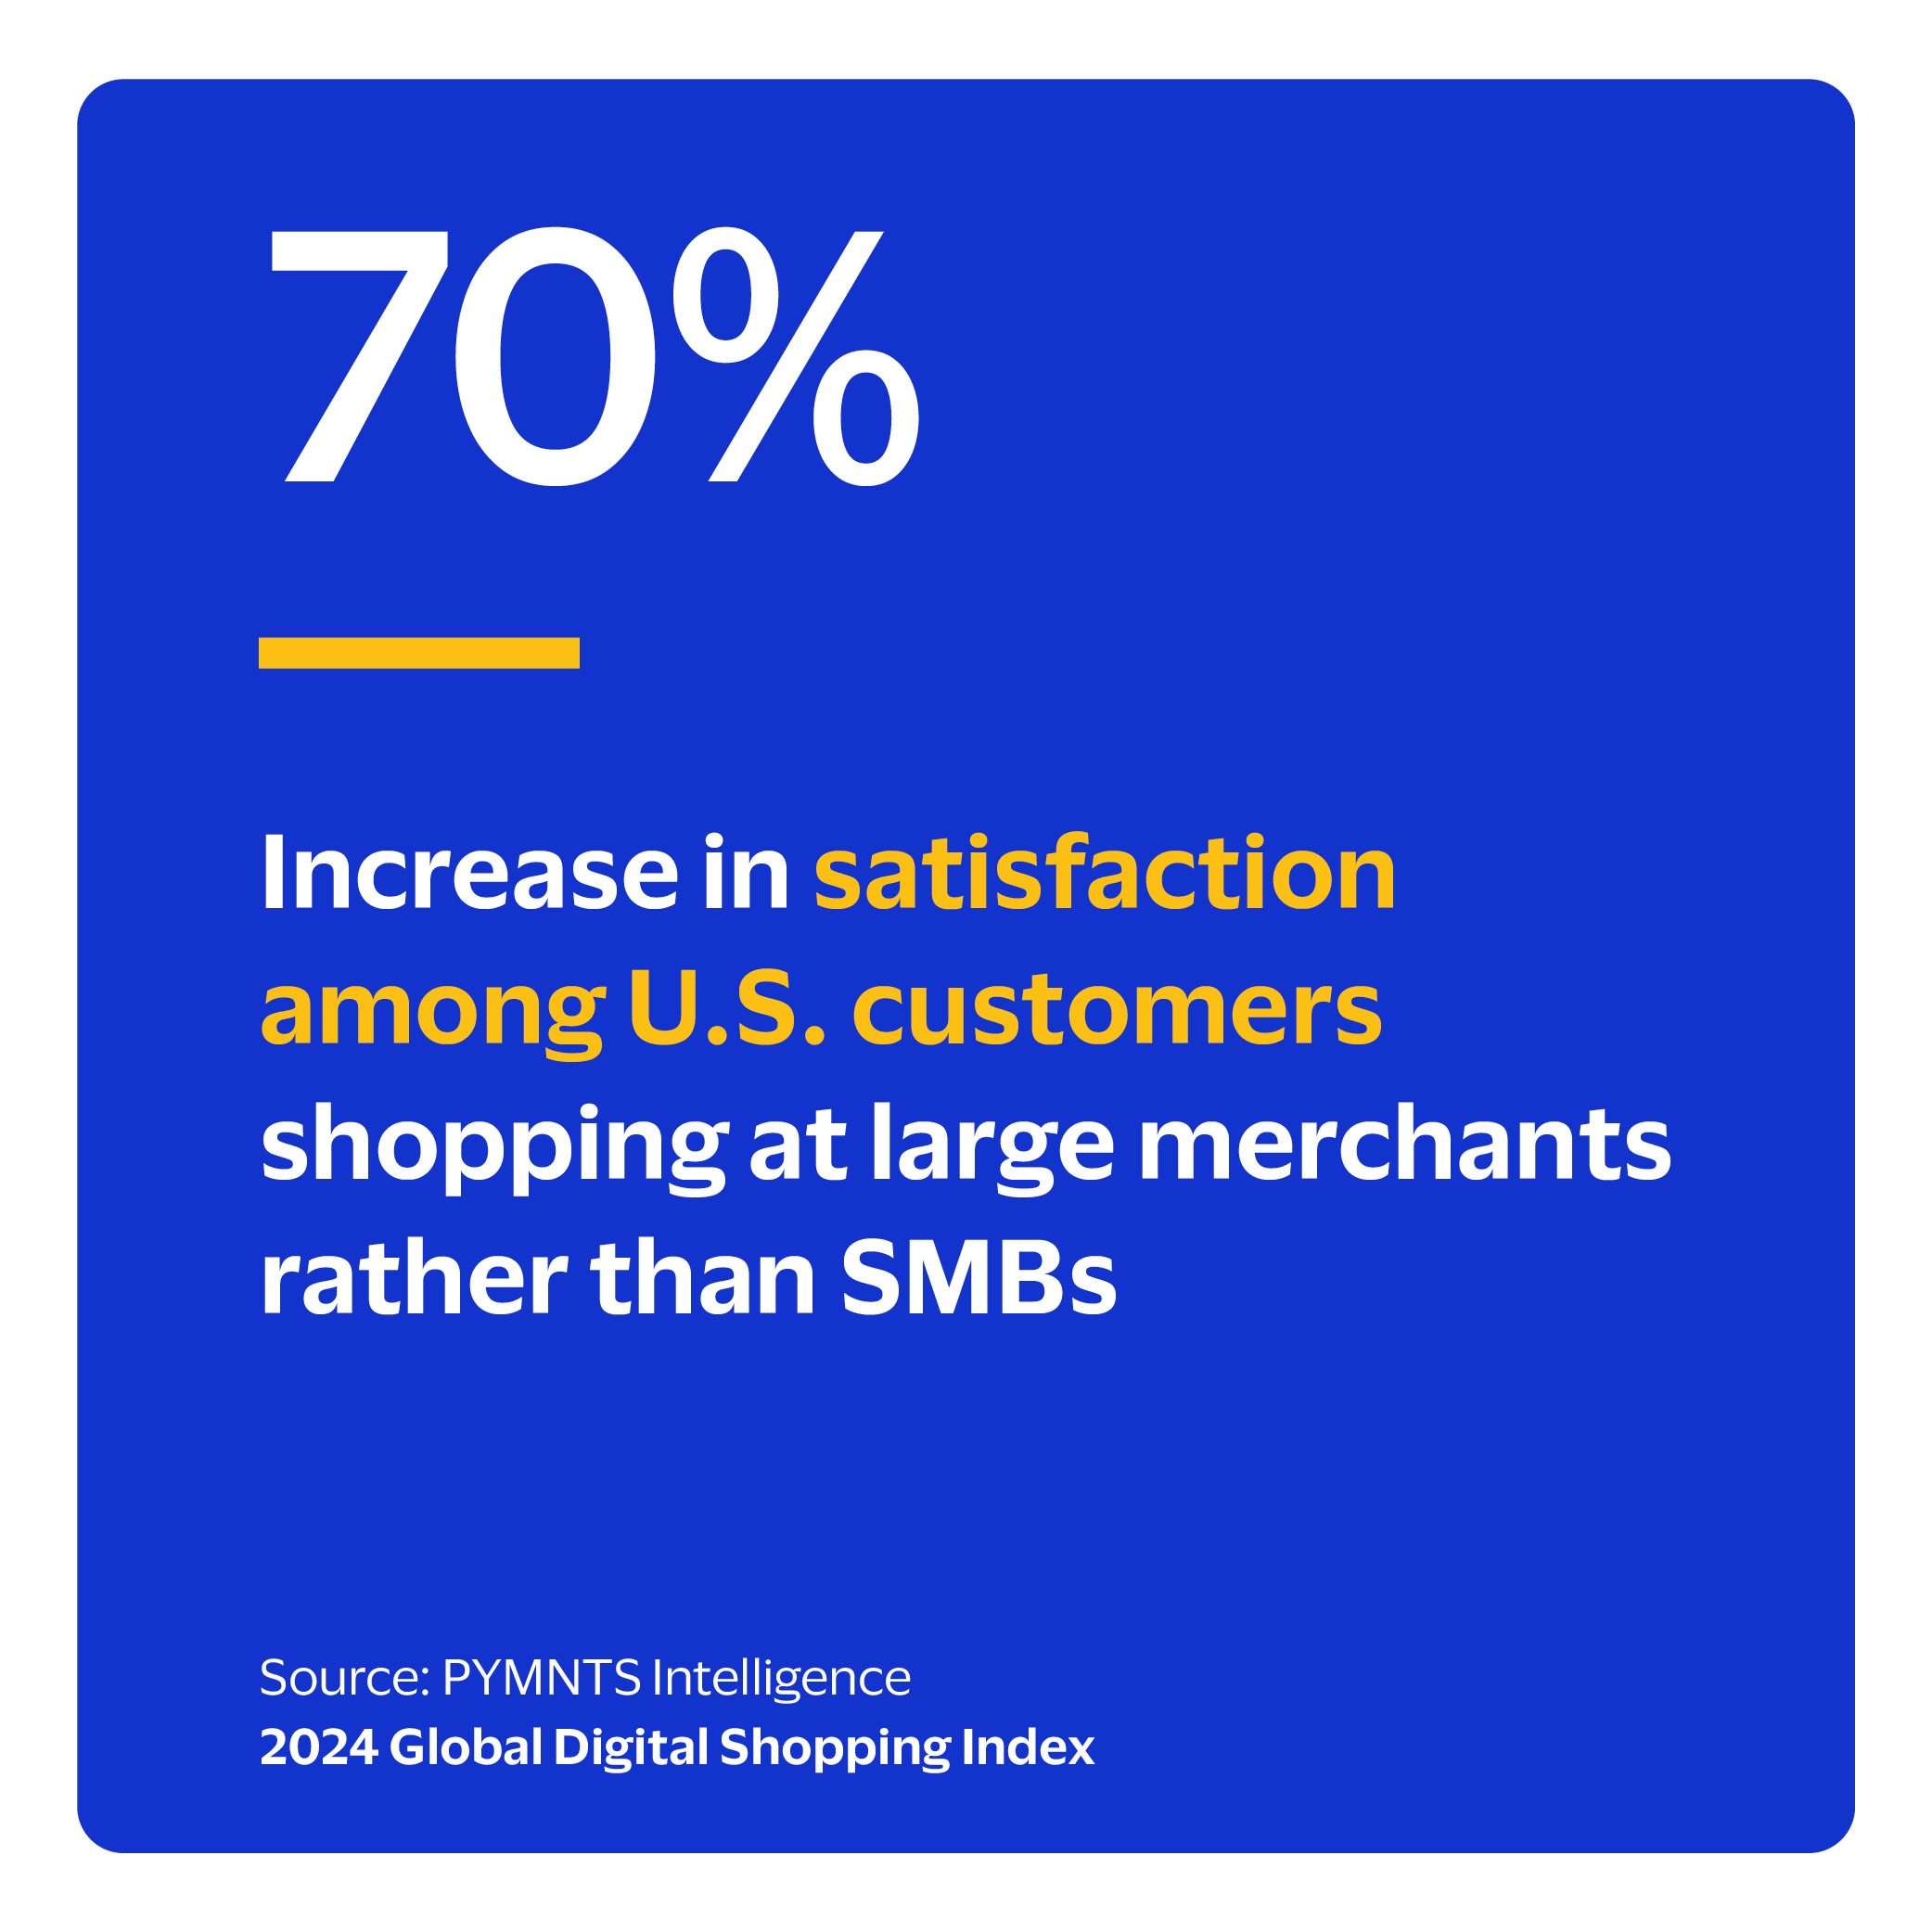 70%: Increase in satisfaction among U.S. customers shopping at large merchants rather than SMBs